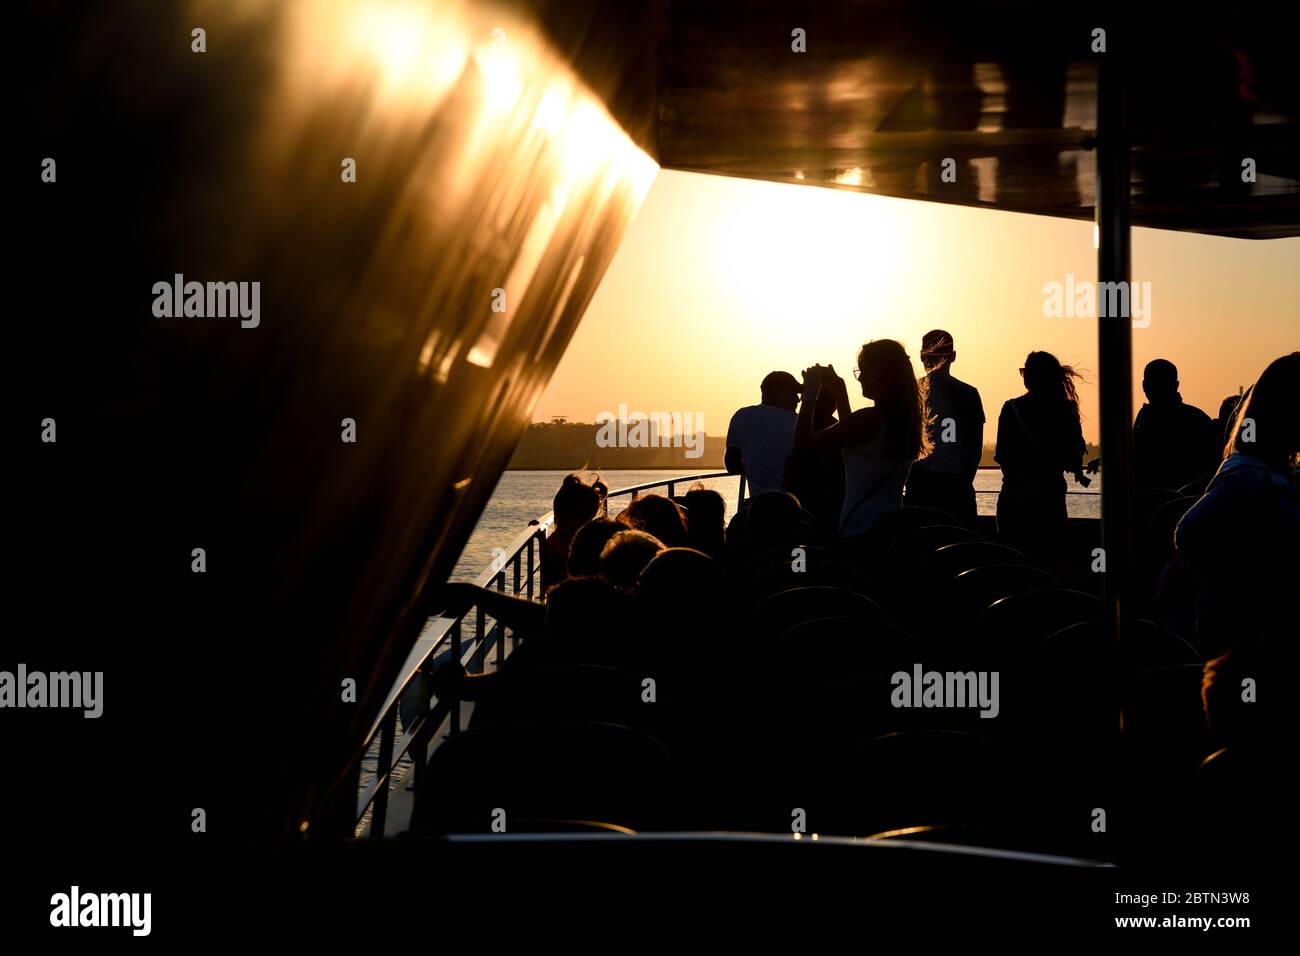 Europe, Ukraine, Odessa. Silhouette of tourists against the light on a boat watching the port of Odessa. Stock Photo